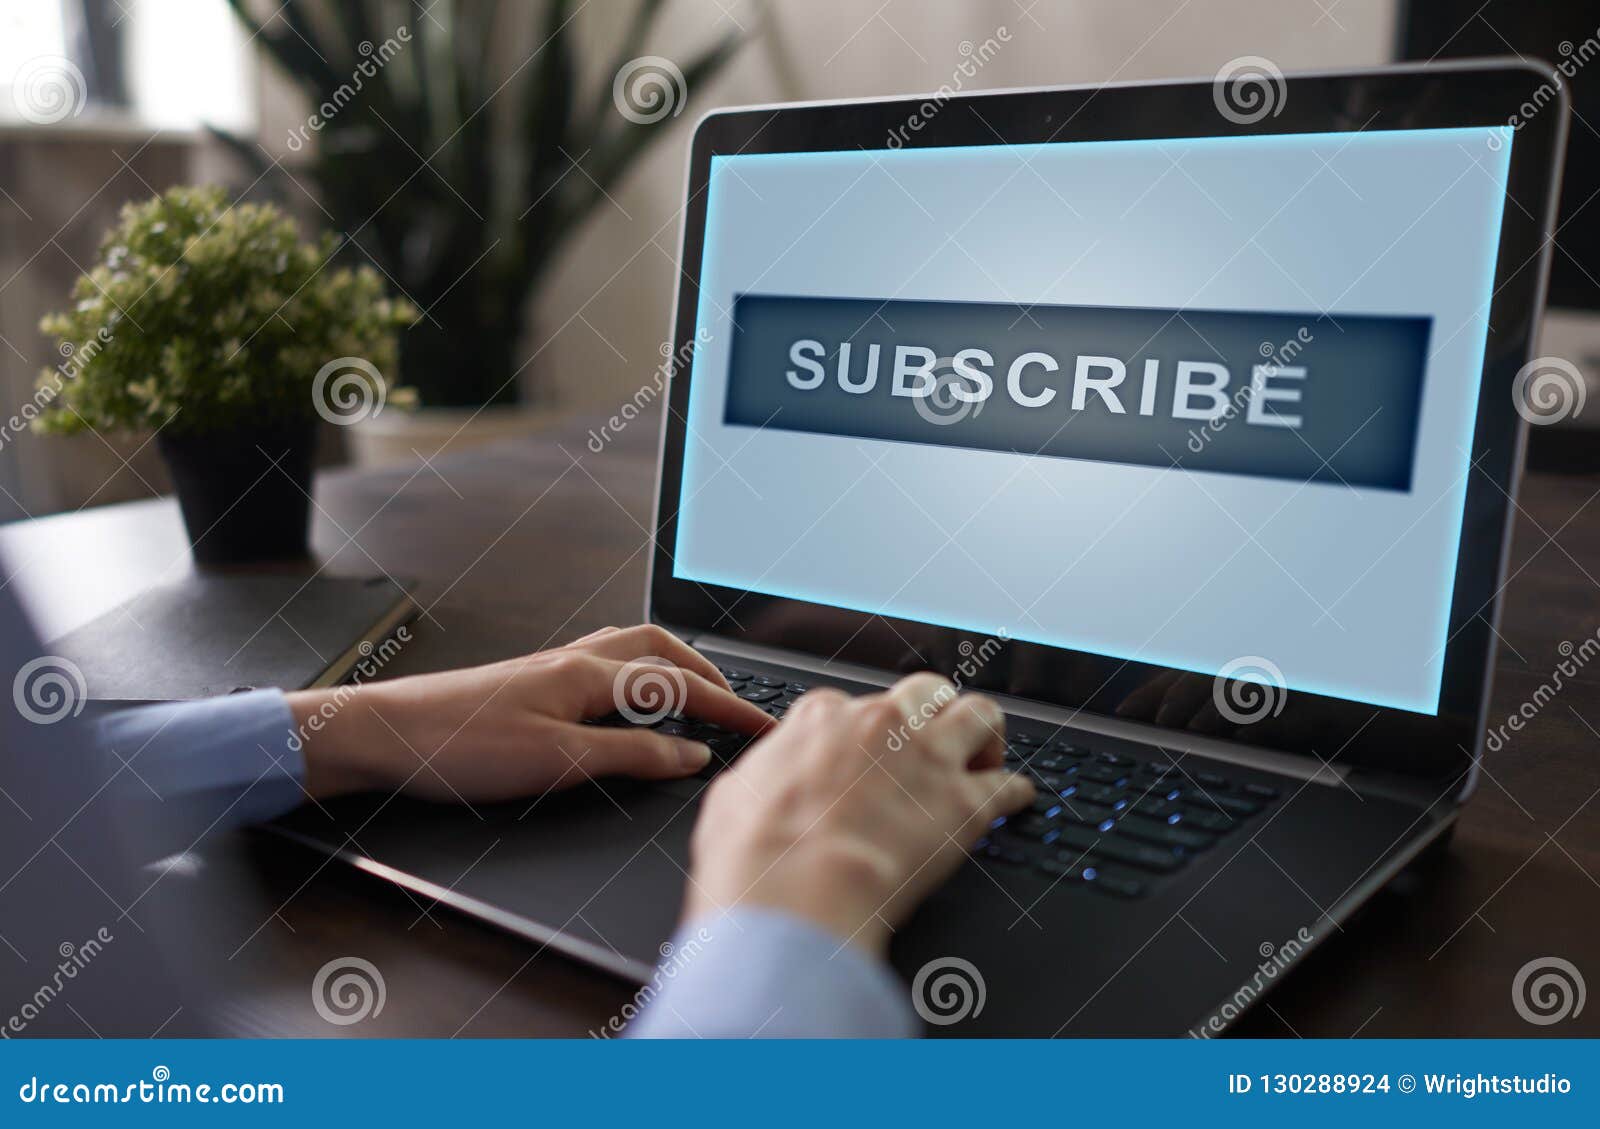 subscribe now, subscription, newsletter button on virtual screen.